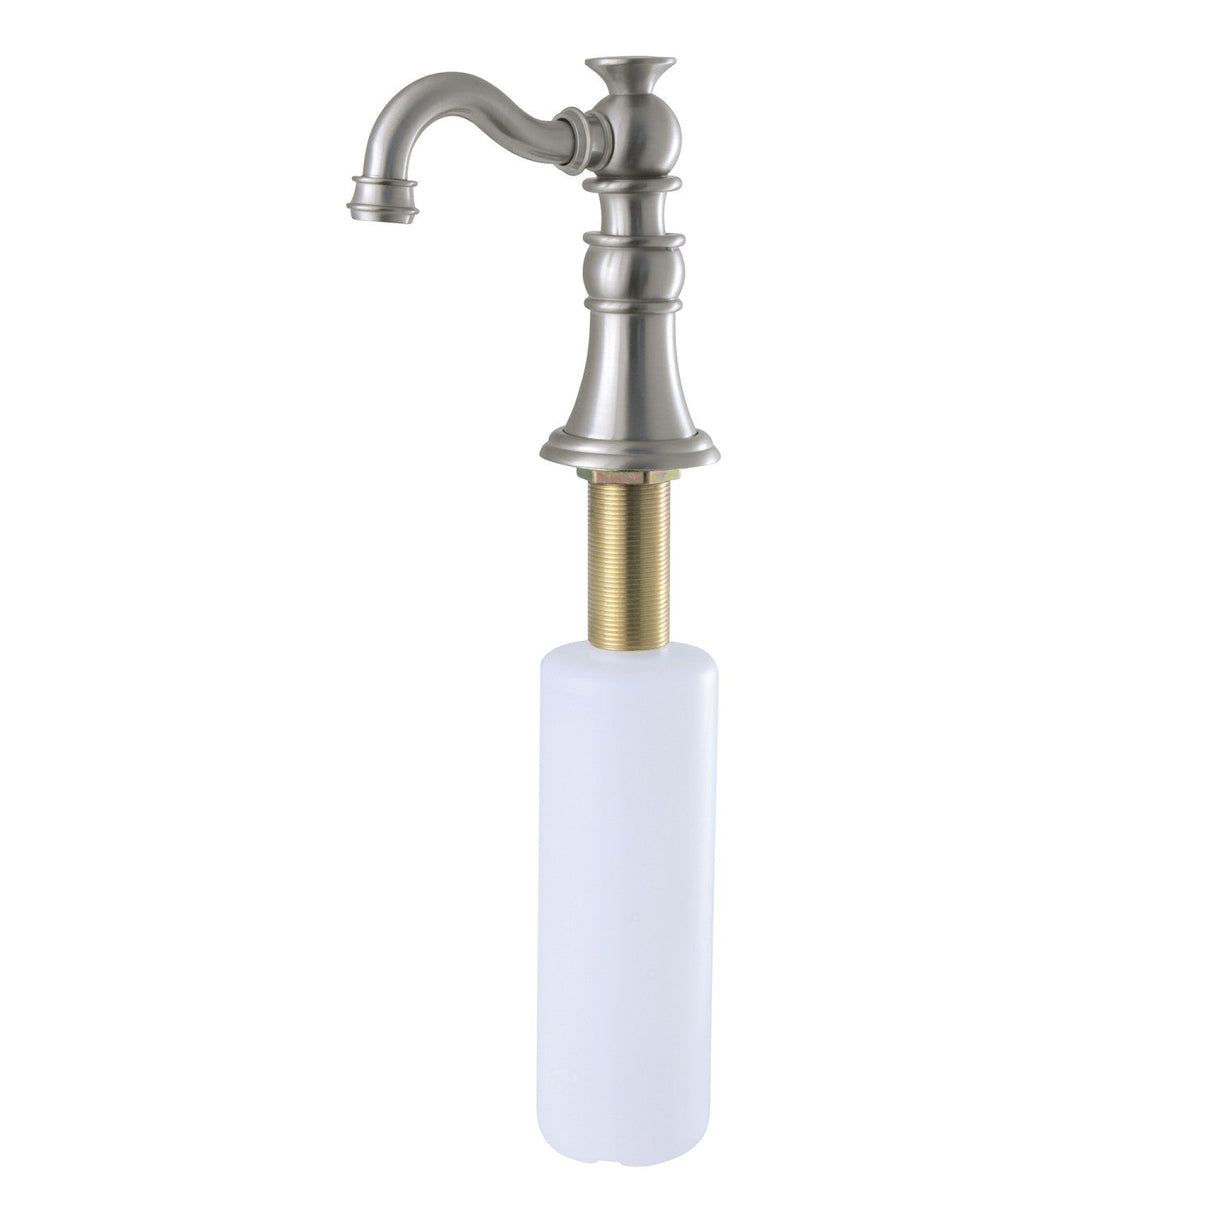 American Classic SD1978 Kitchen Soap Dispenser, Brushed Nickel